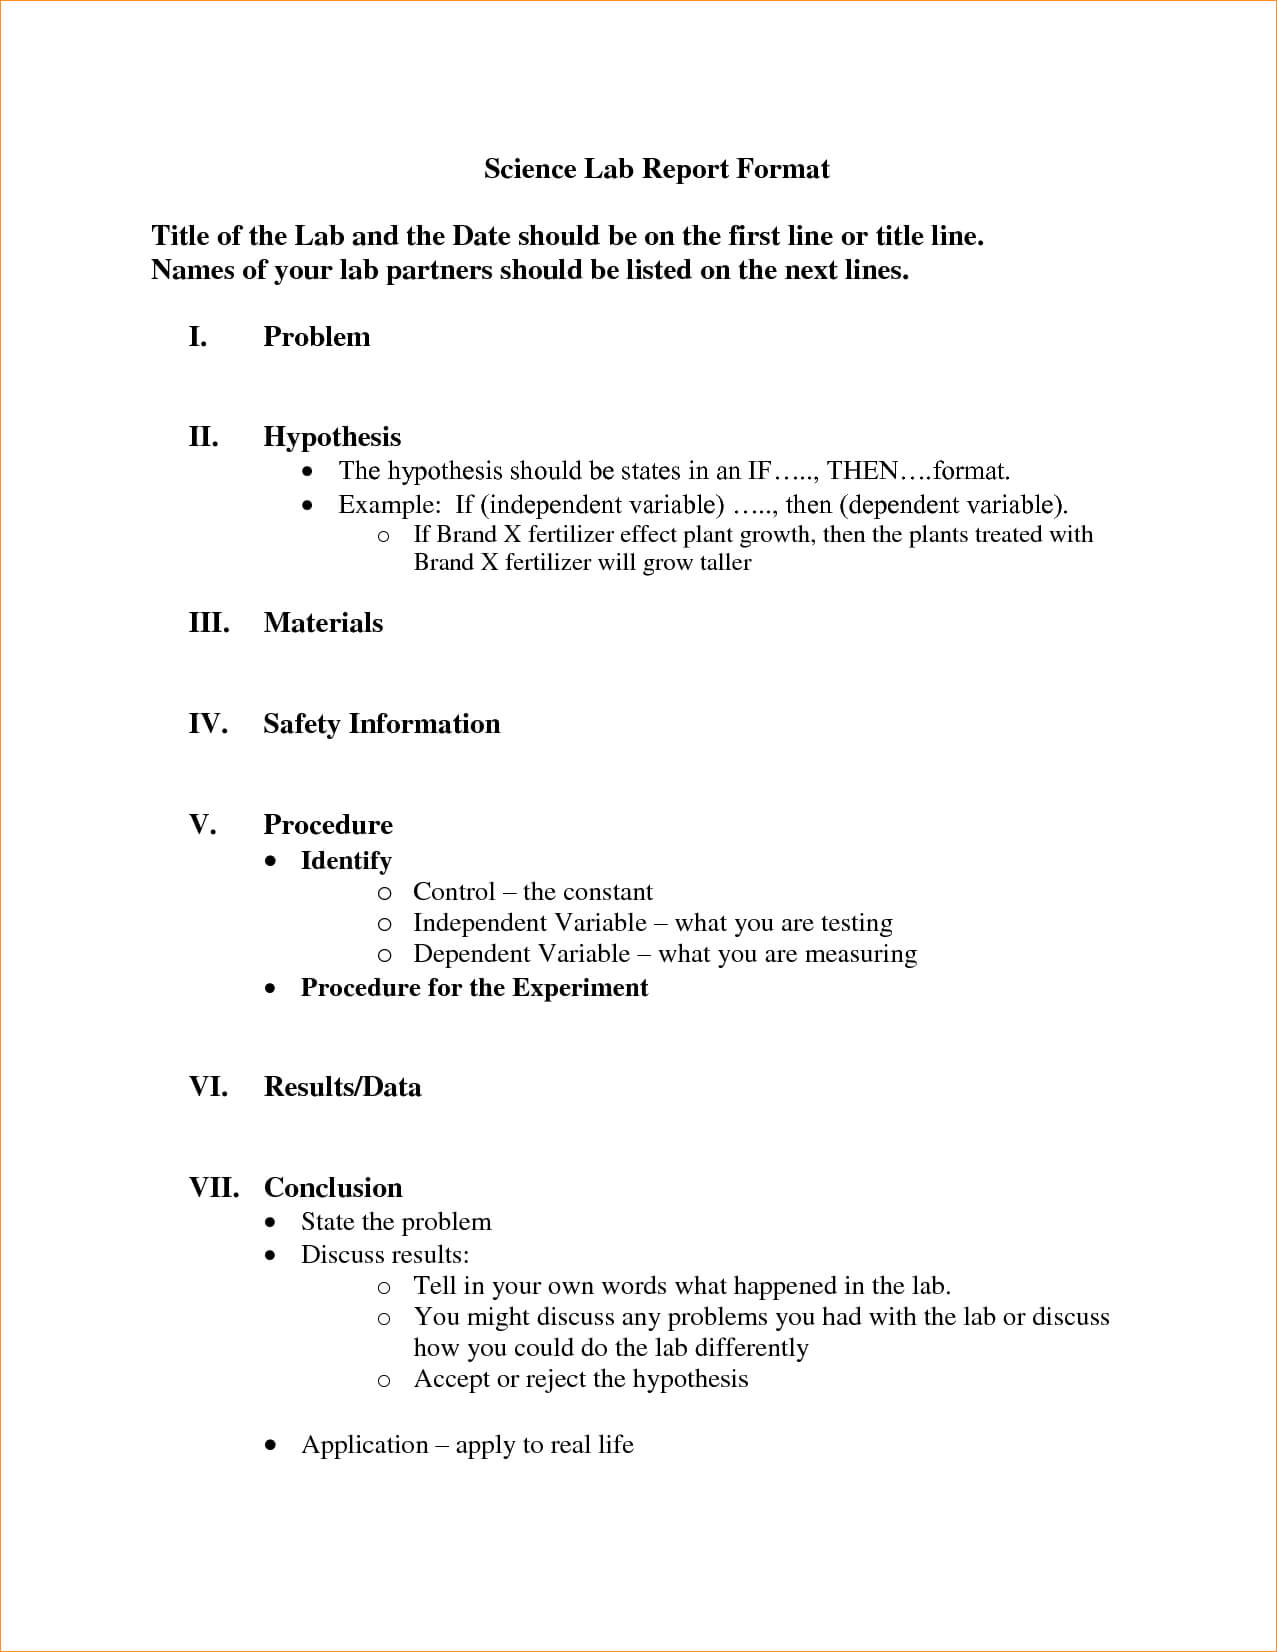 25 Images Of Njctl Lab Report Template Pdf | Zeept Throughout Science Experiment Report Template